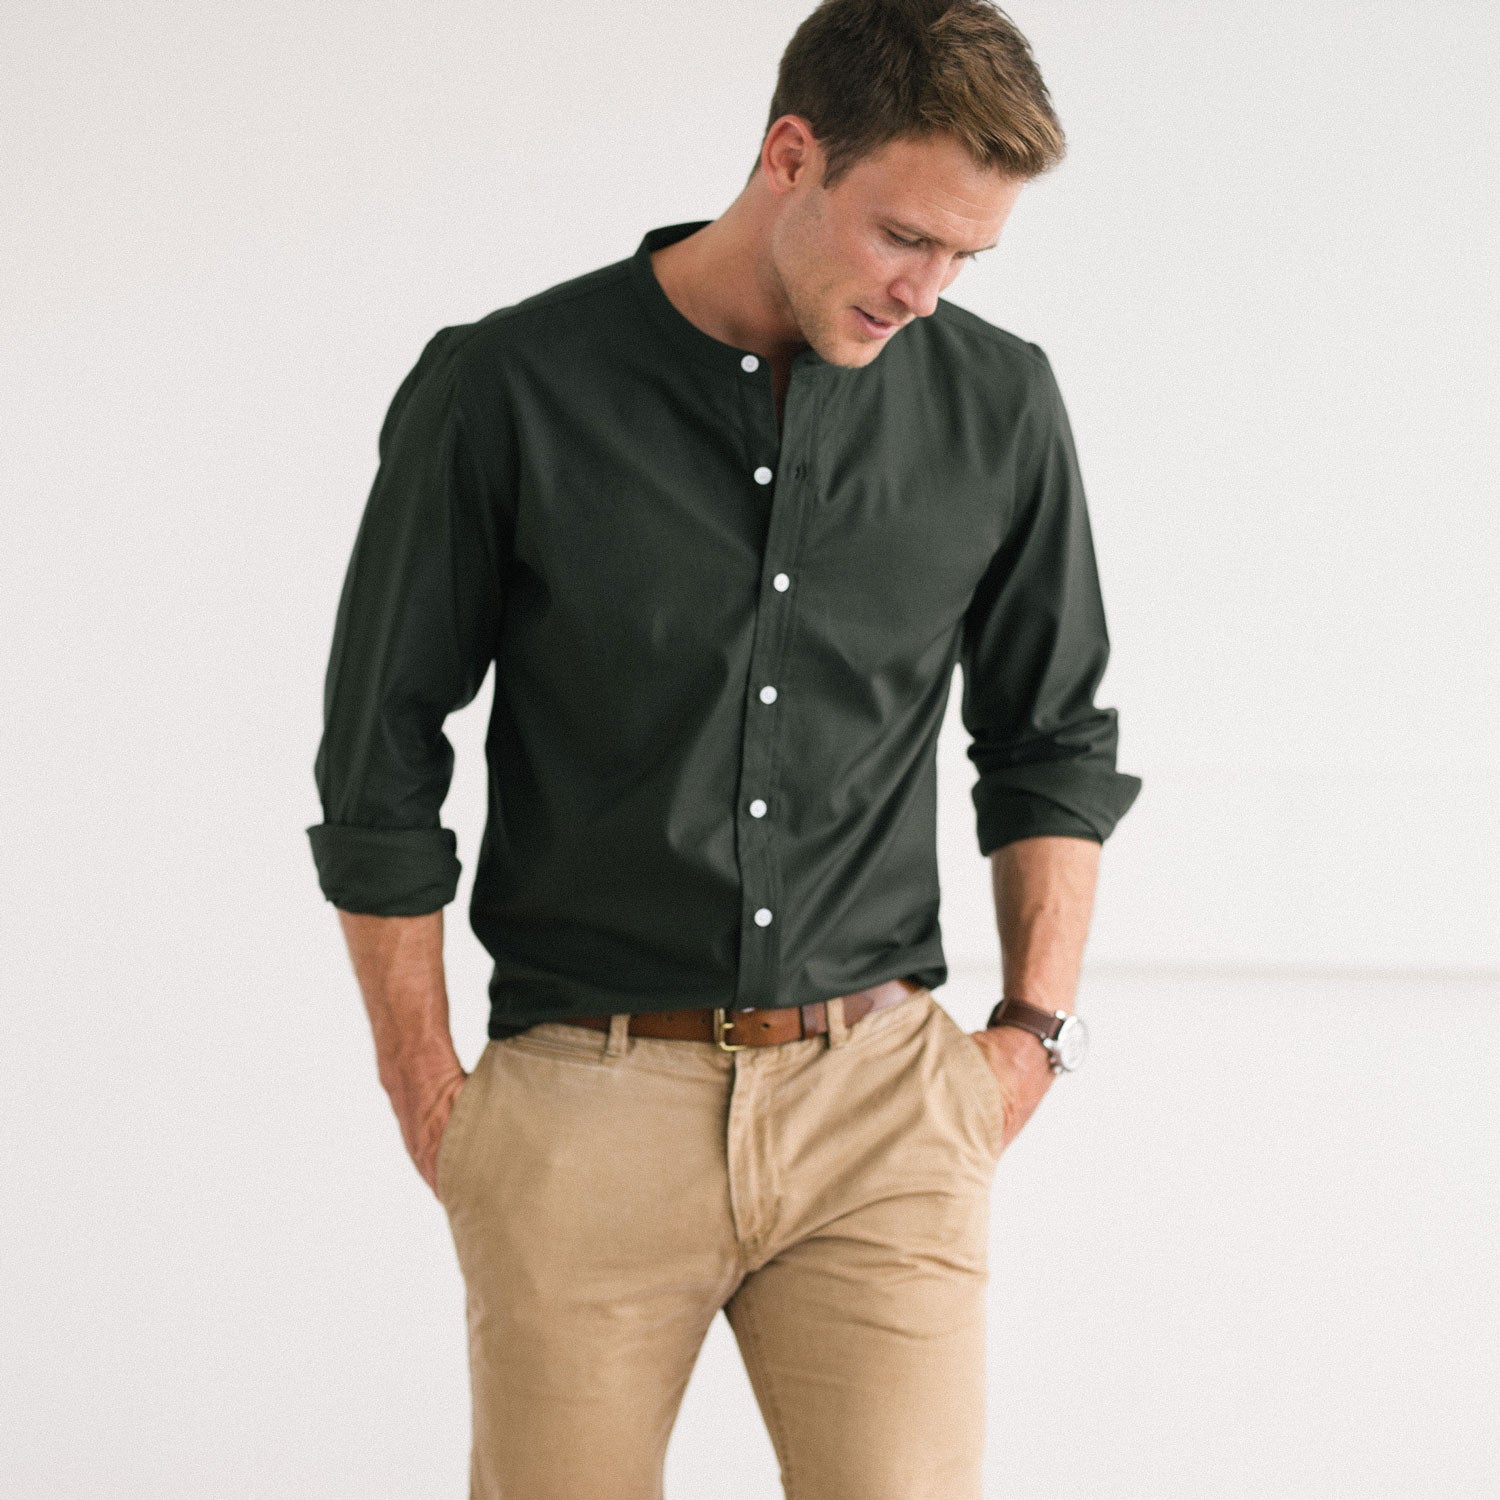 10 Style Tips for Men's Casual Band Collar Shirts